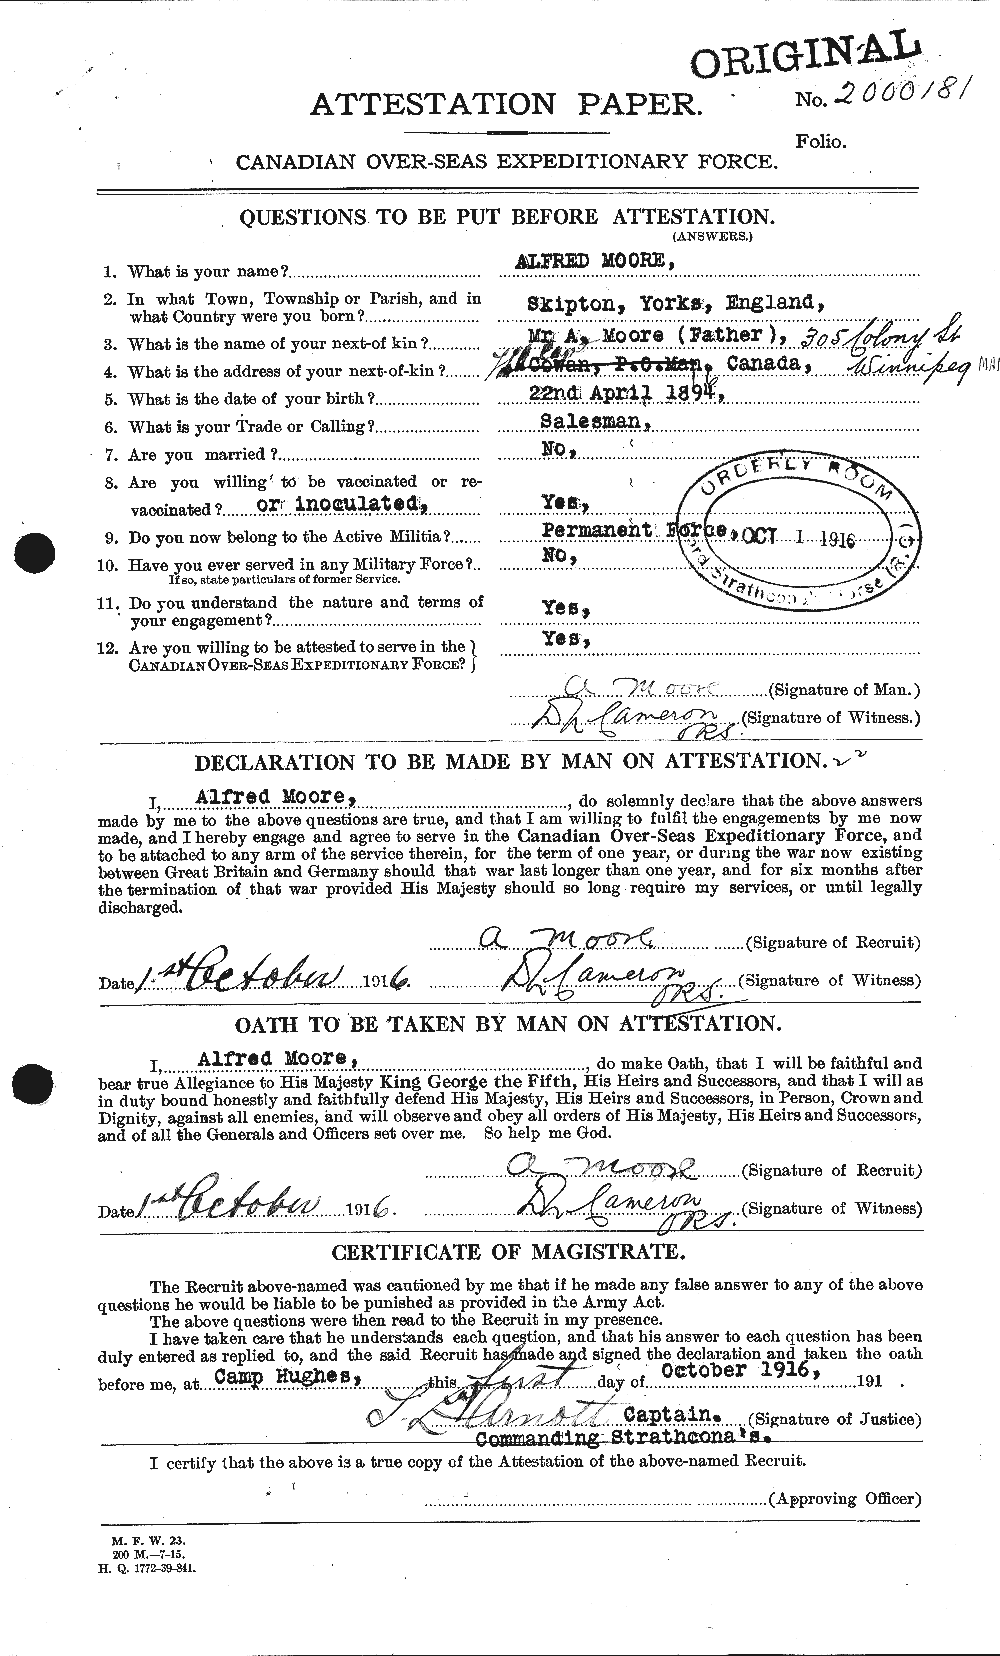 Personnel Records of the First World War - CEF 506379a